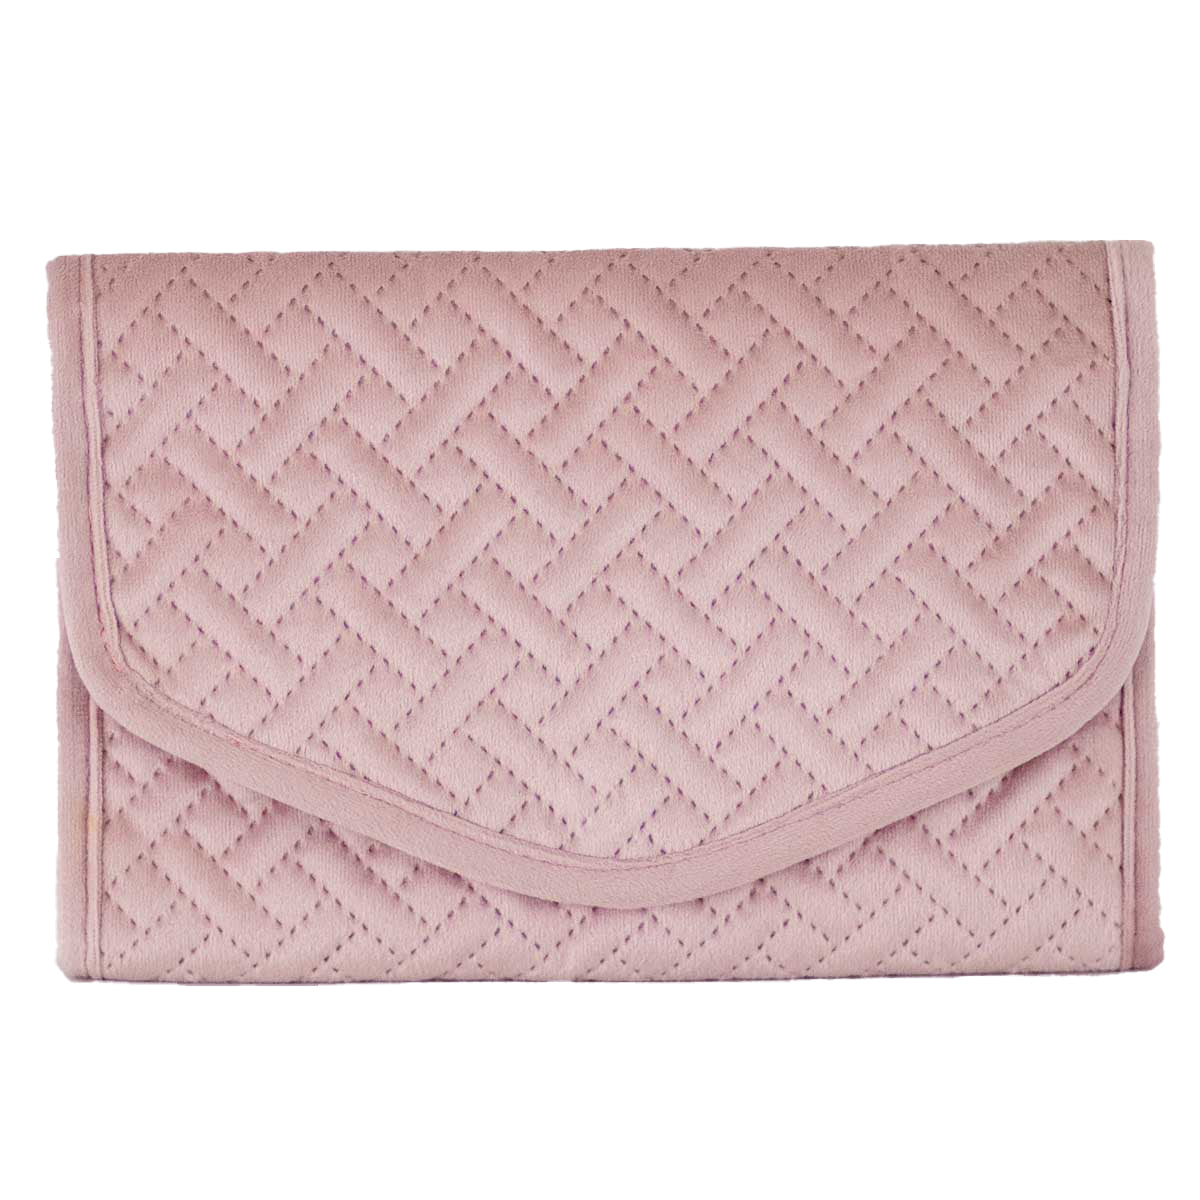 Quilted Jewelry Clutch in Light Pink